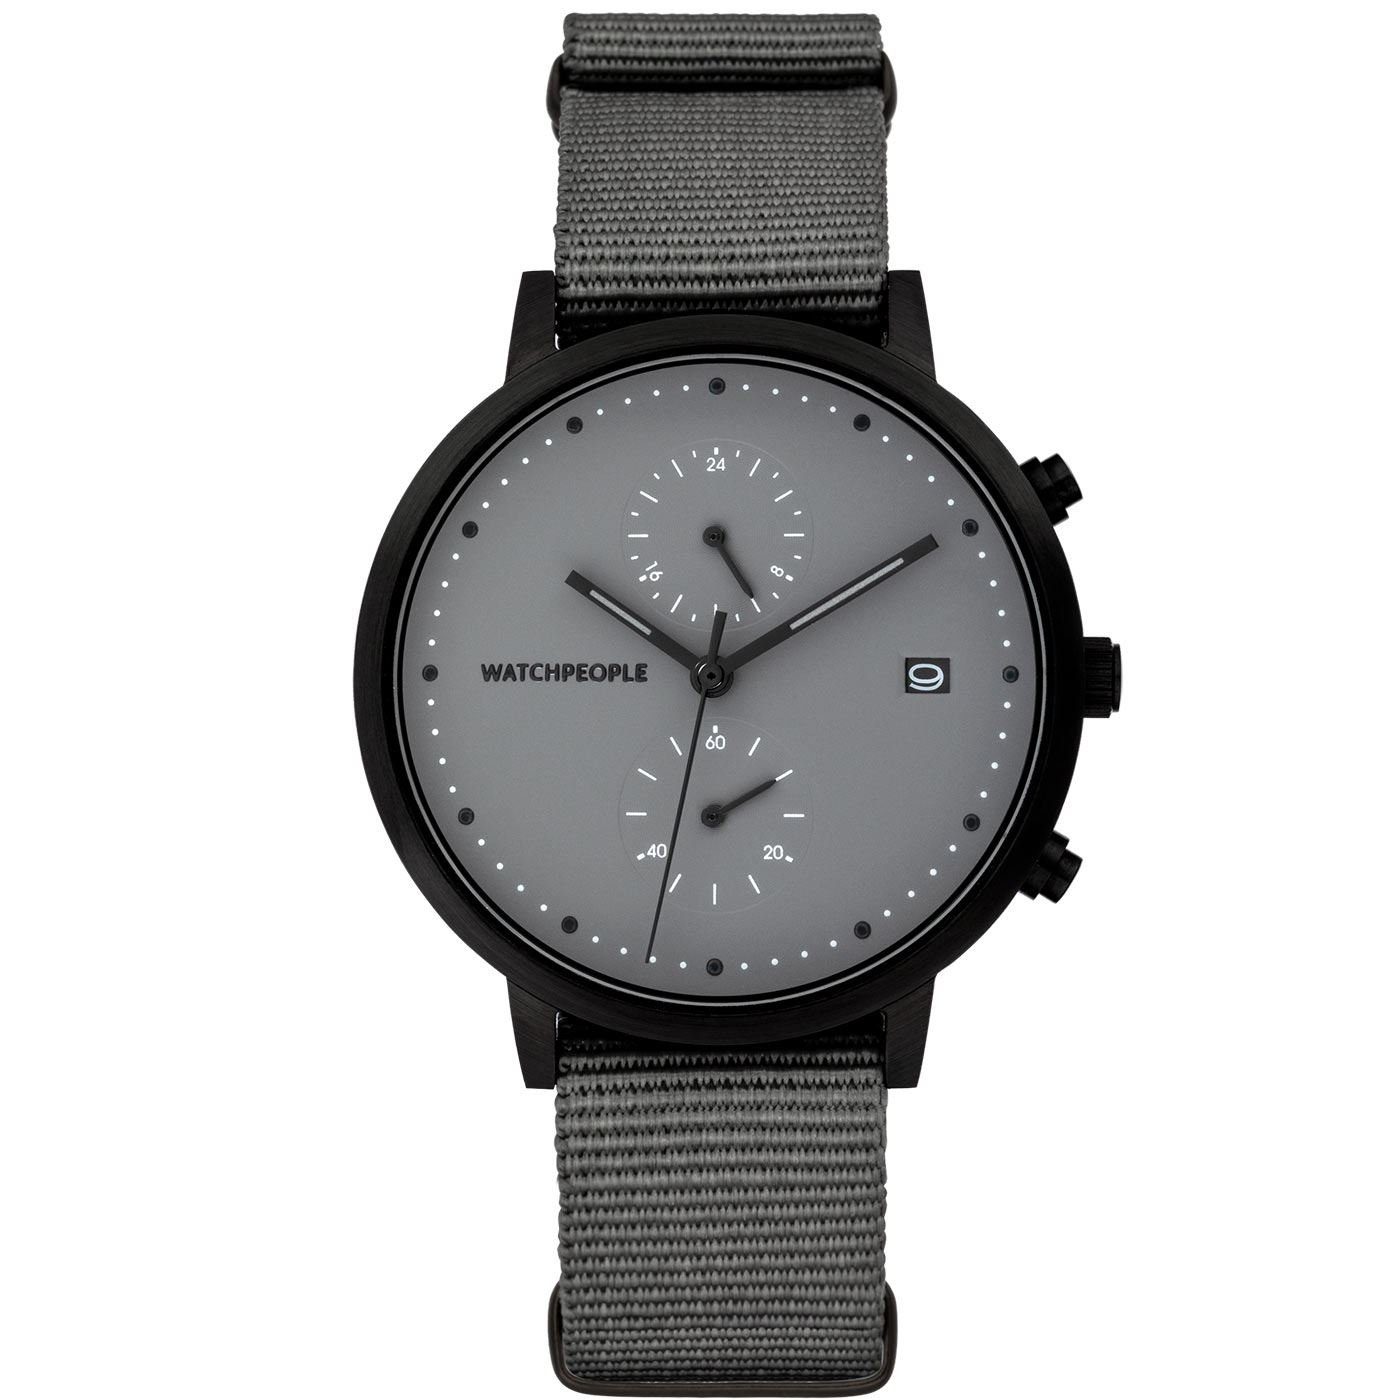 Watchpeople Multifunktionsuhr Cosmo Black Nato WP 050-03, flach, Datumsanzeige, Dual-Time, easy release Band